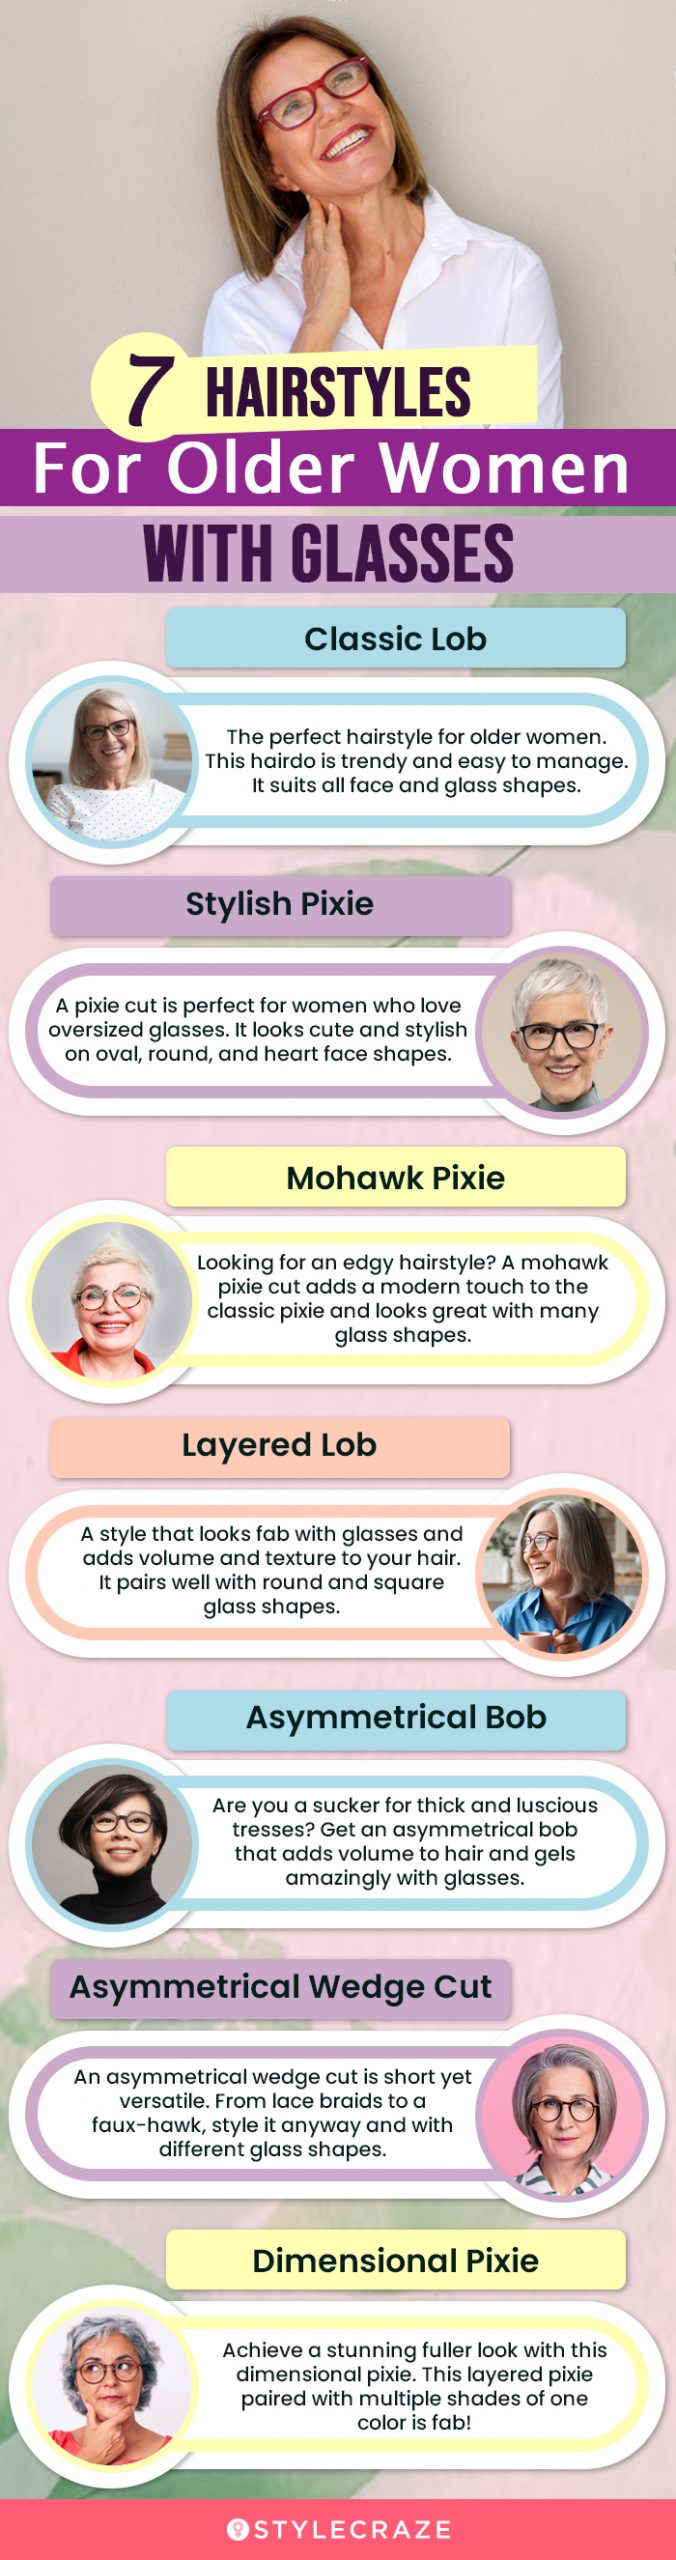 7 hairstyles for older women with glasses (infographic)